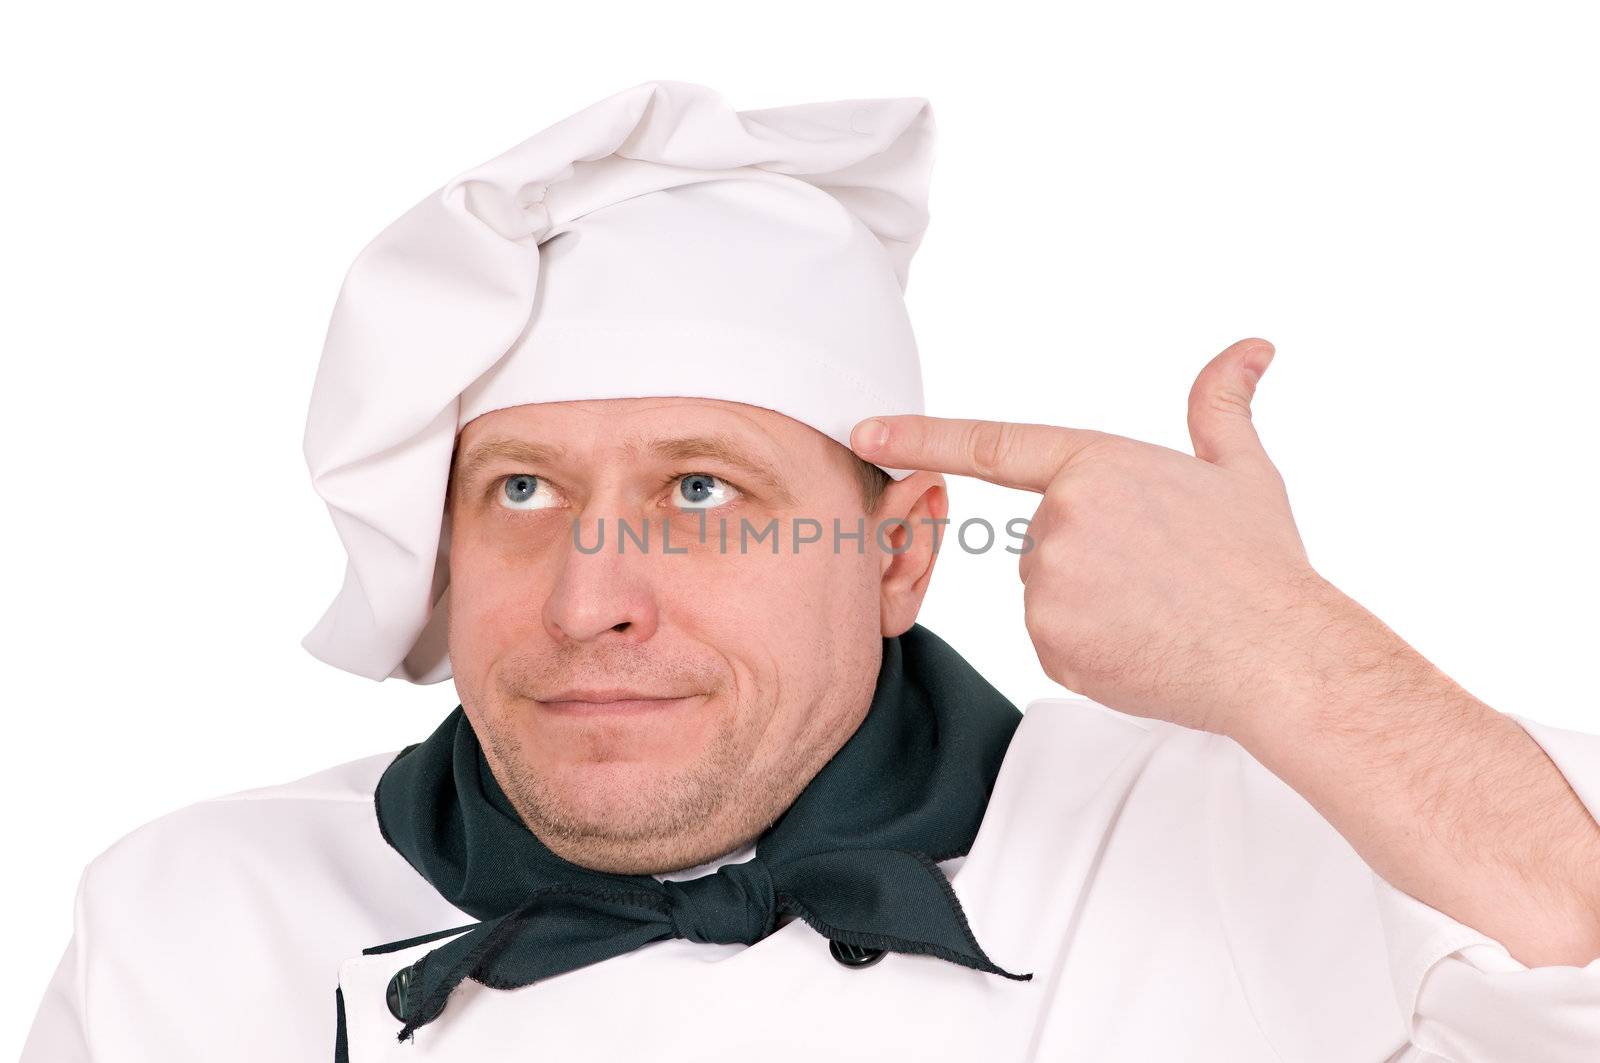 chef has a bad mood isolated on white background